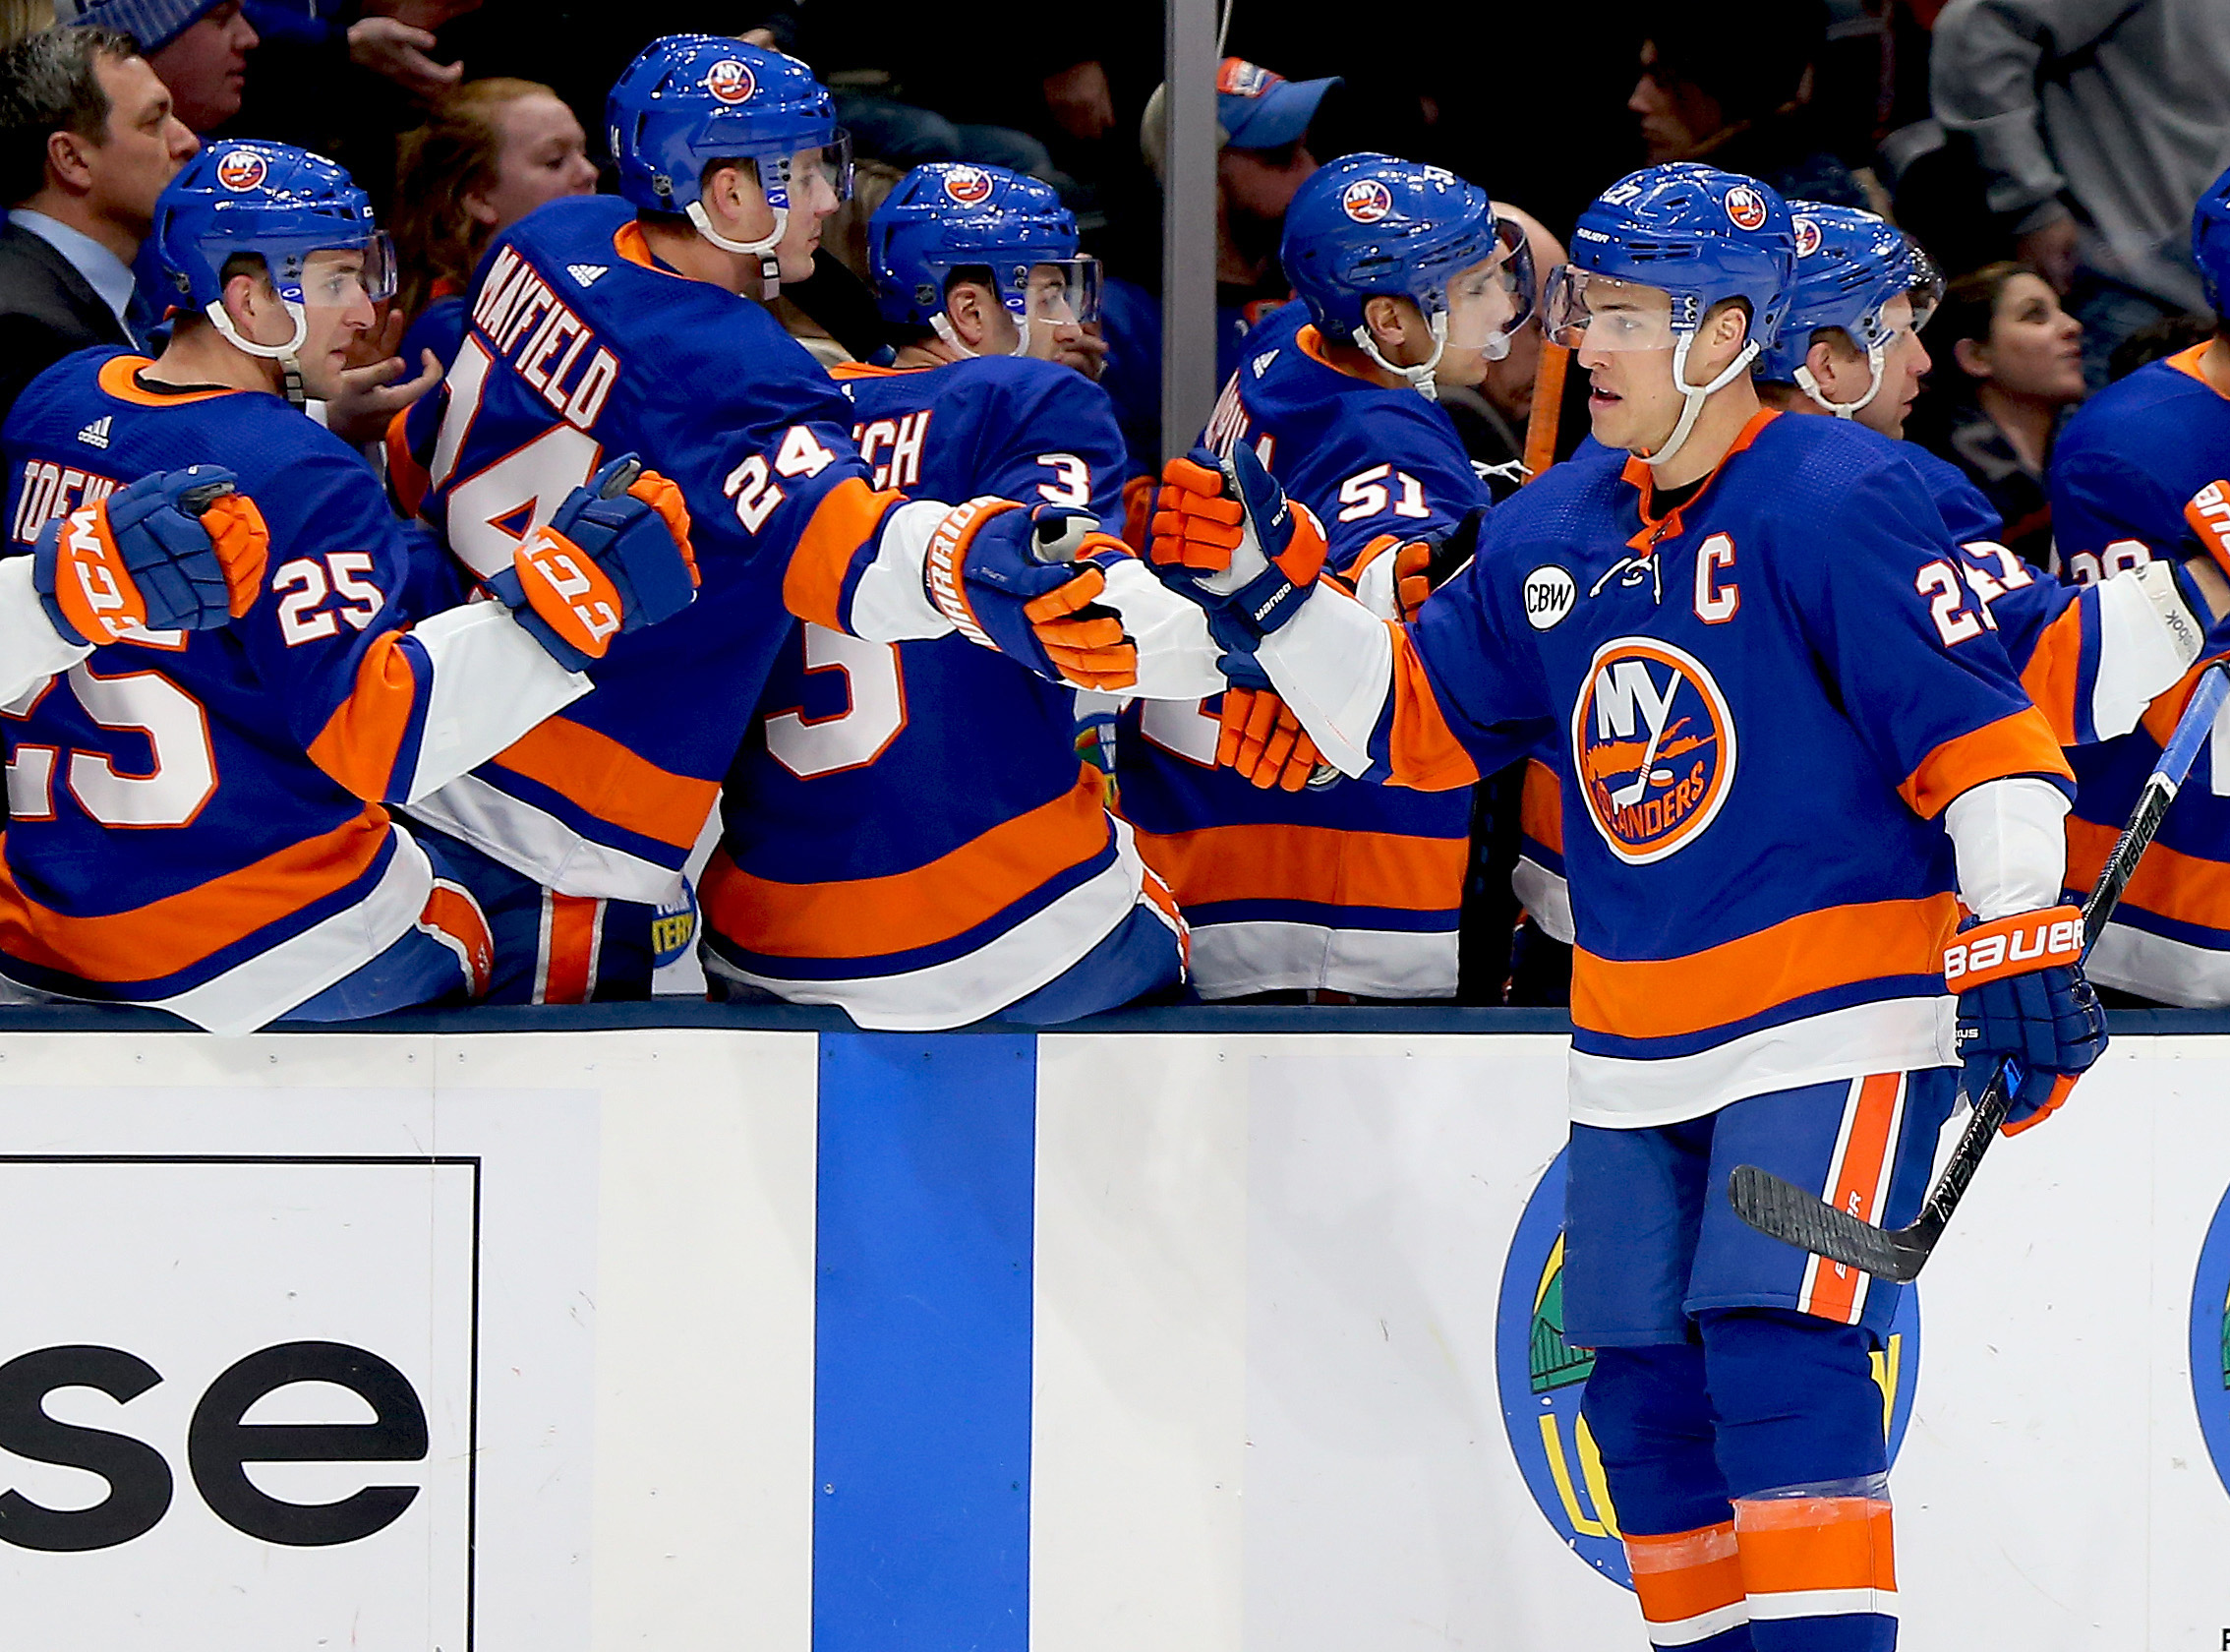 Jan 17, 2019; Uniondale, NY, USA; New York Islanders left wing Anders Lee (27) celebrates with teammates on the bench after scoring a goal against the New Jersey Devils during the first period at Nassau Veterans Memorial Coliseum. Mandatory Credit: Andy Marlin-USA TODAY Sports